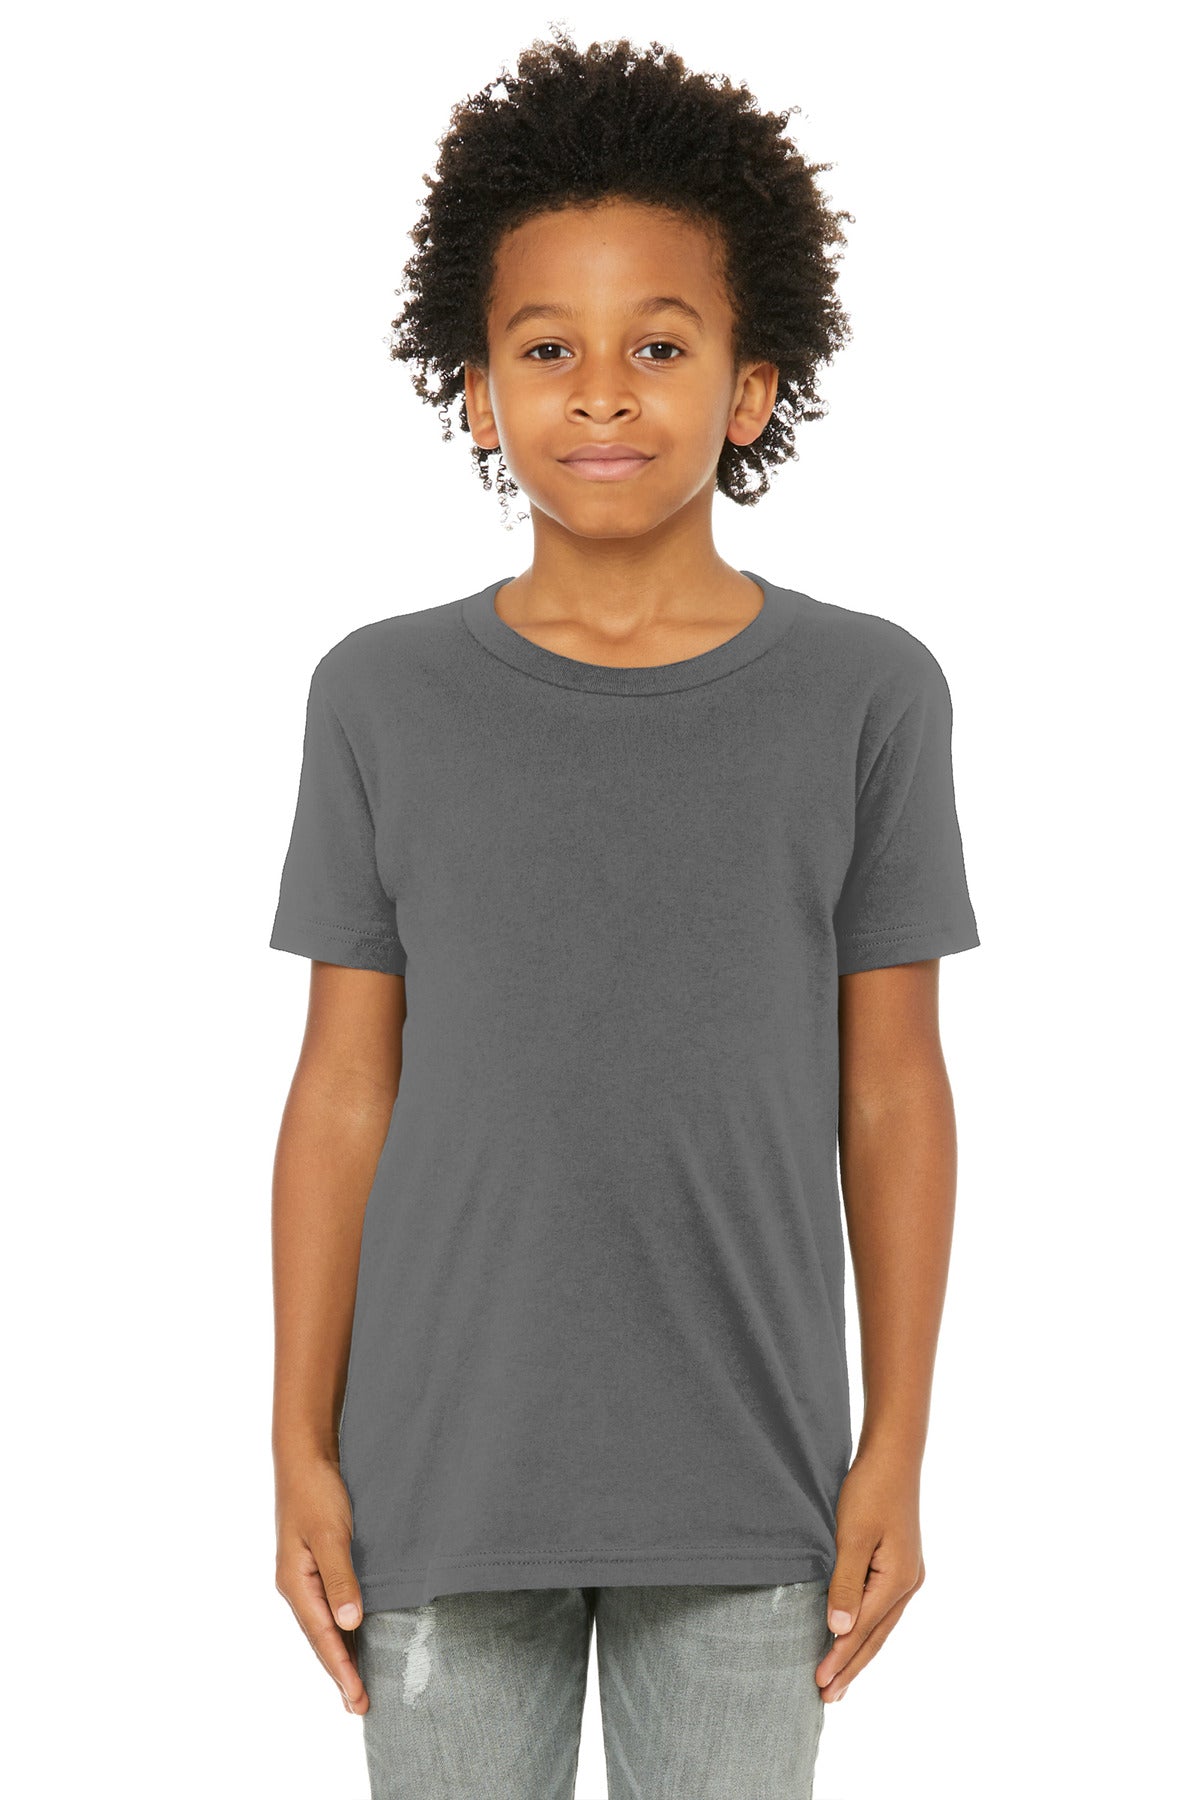 BELLA+CANVAS ® Youth Jersey Short Sleeve Tee. BC3001Y